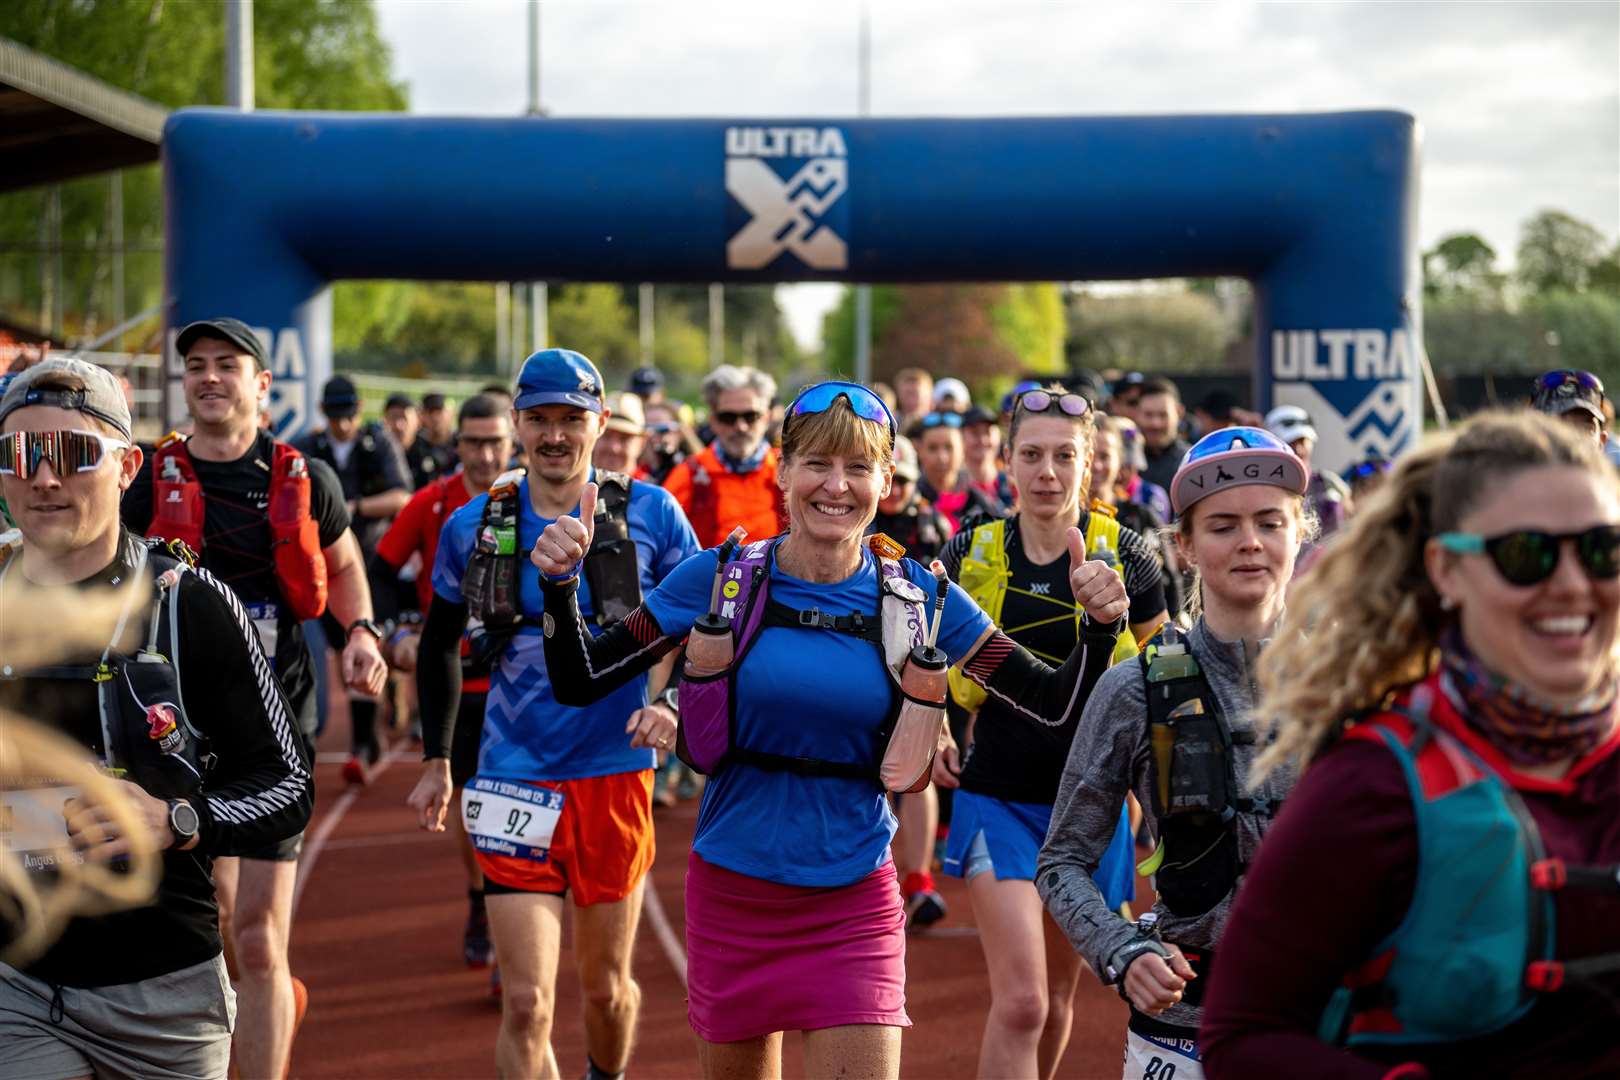 The start of Ultra X Scotland takes place at Queen's Park in Inverness.